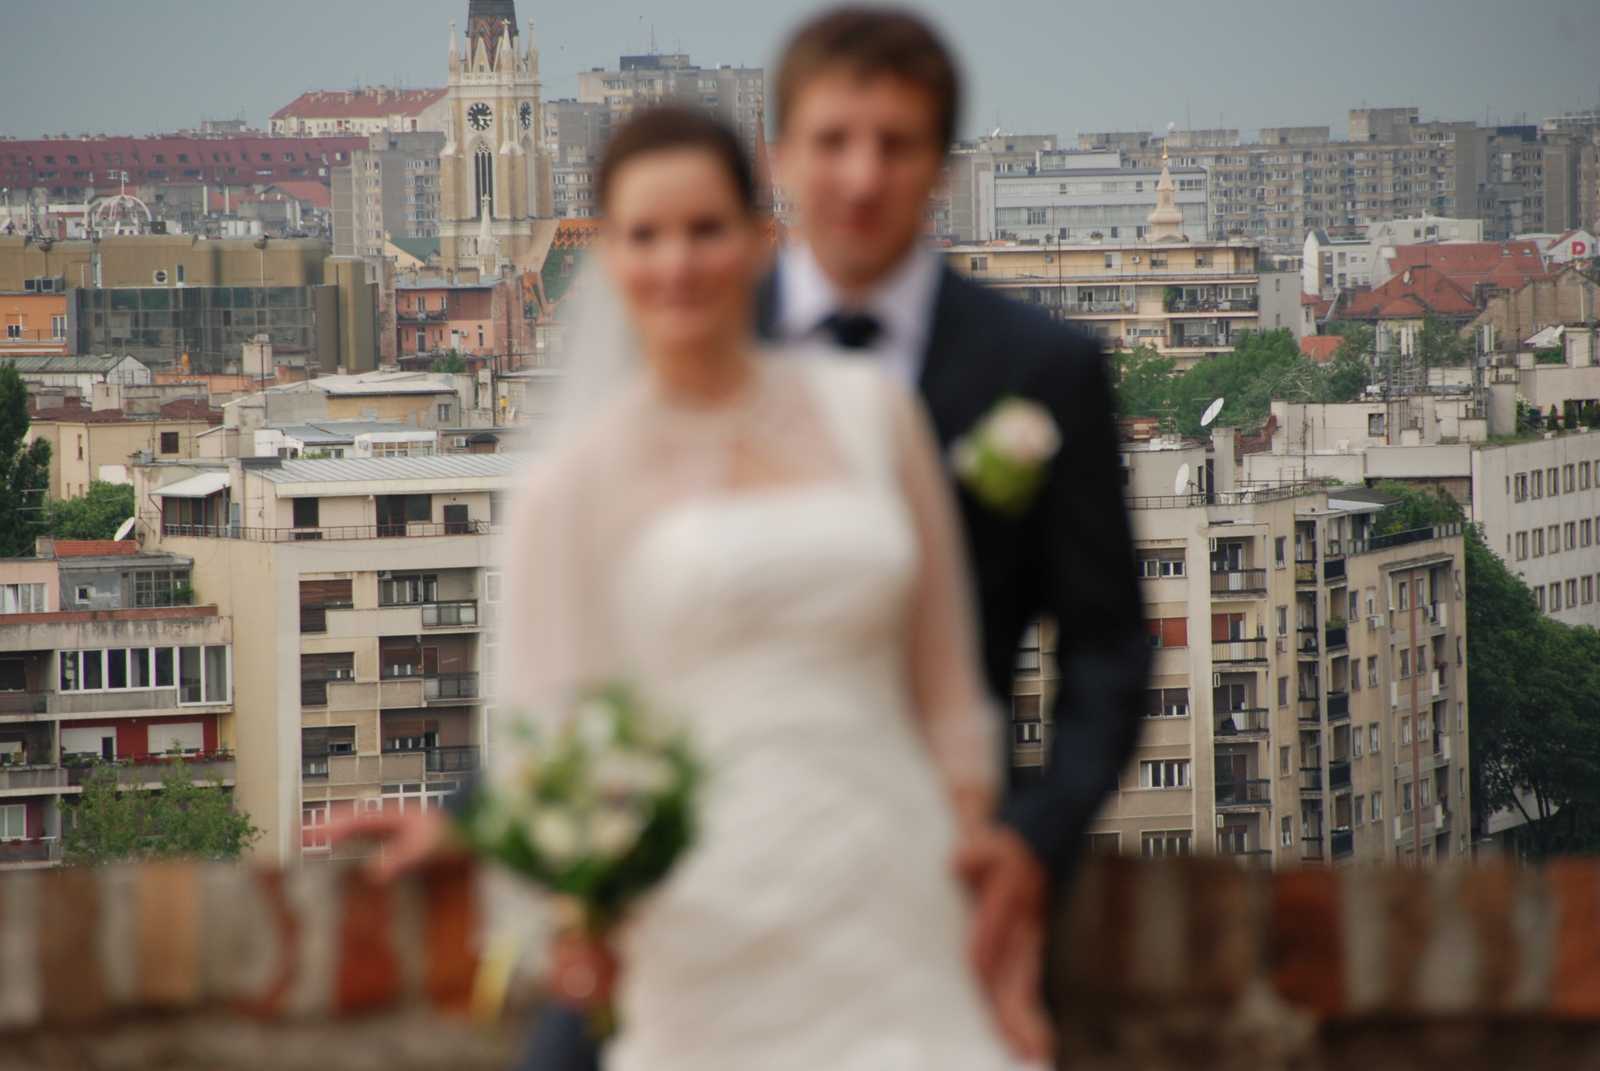 Weddings - Jelena and Nebojsa, out of focus